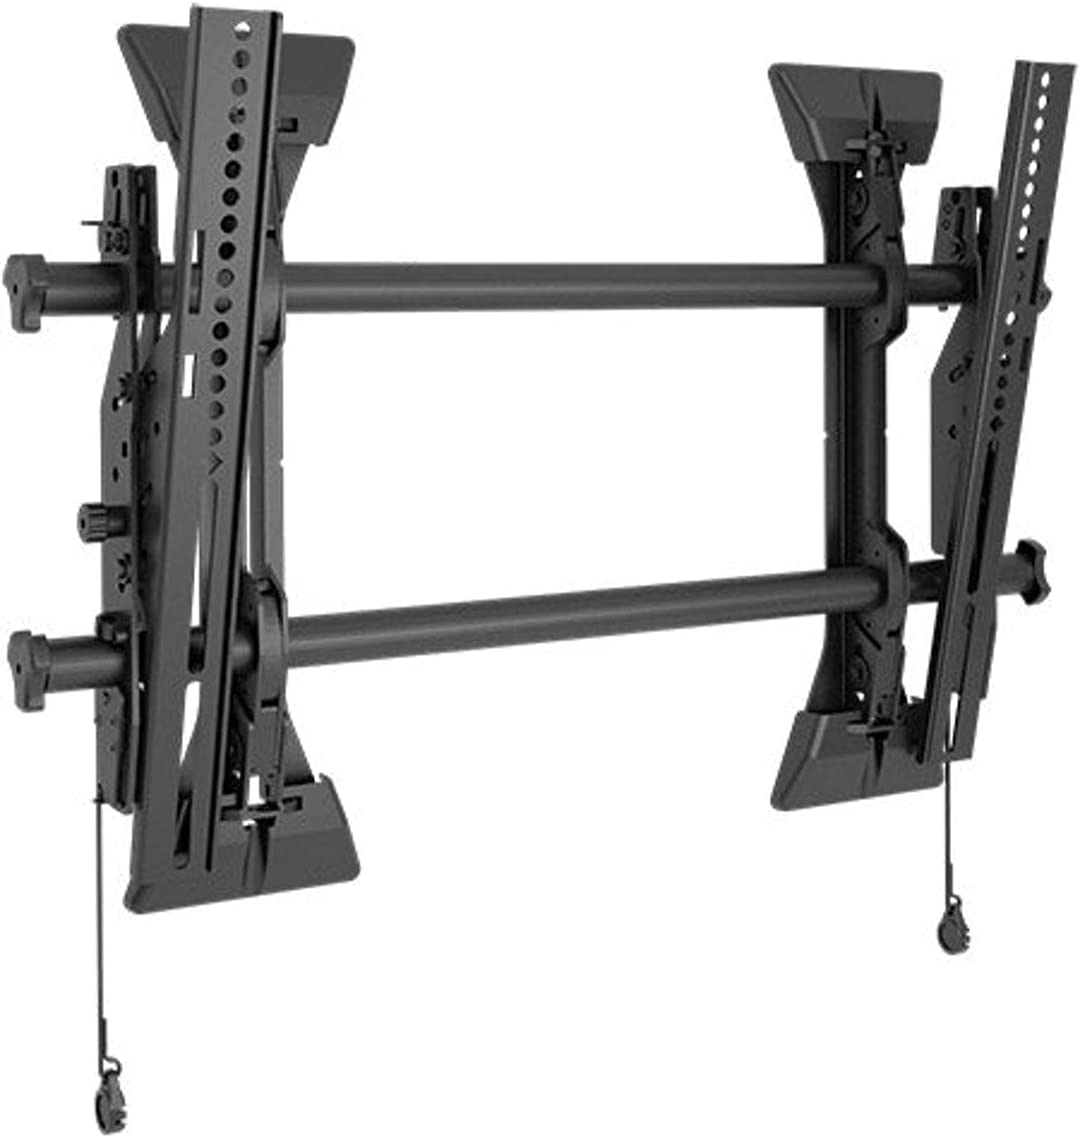 Chief mfg. Chief Manufacturing Fusion Wall Tilt Wall Mount for Flat Panel Display MTM1U